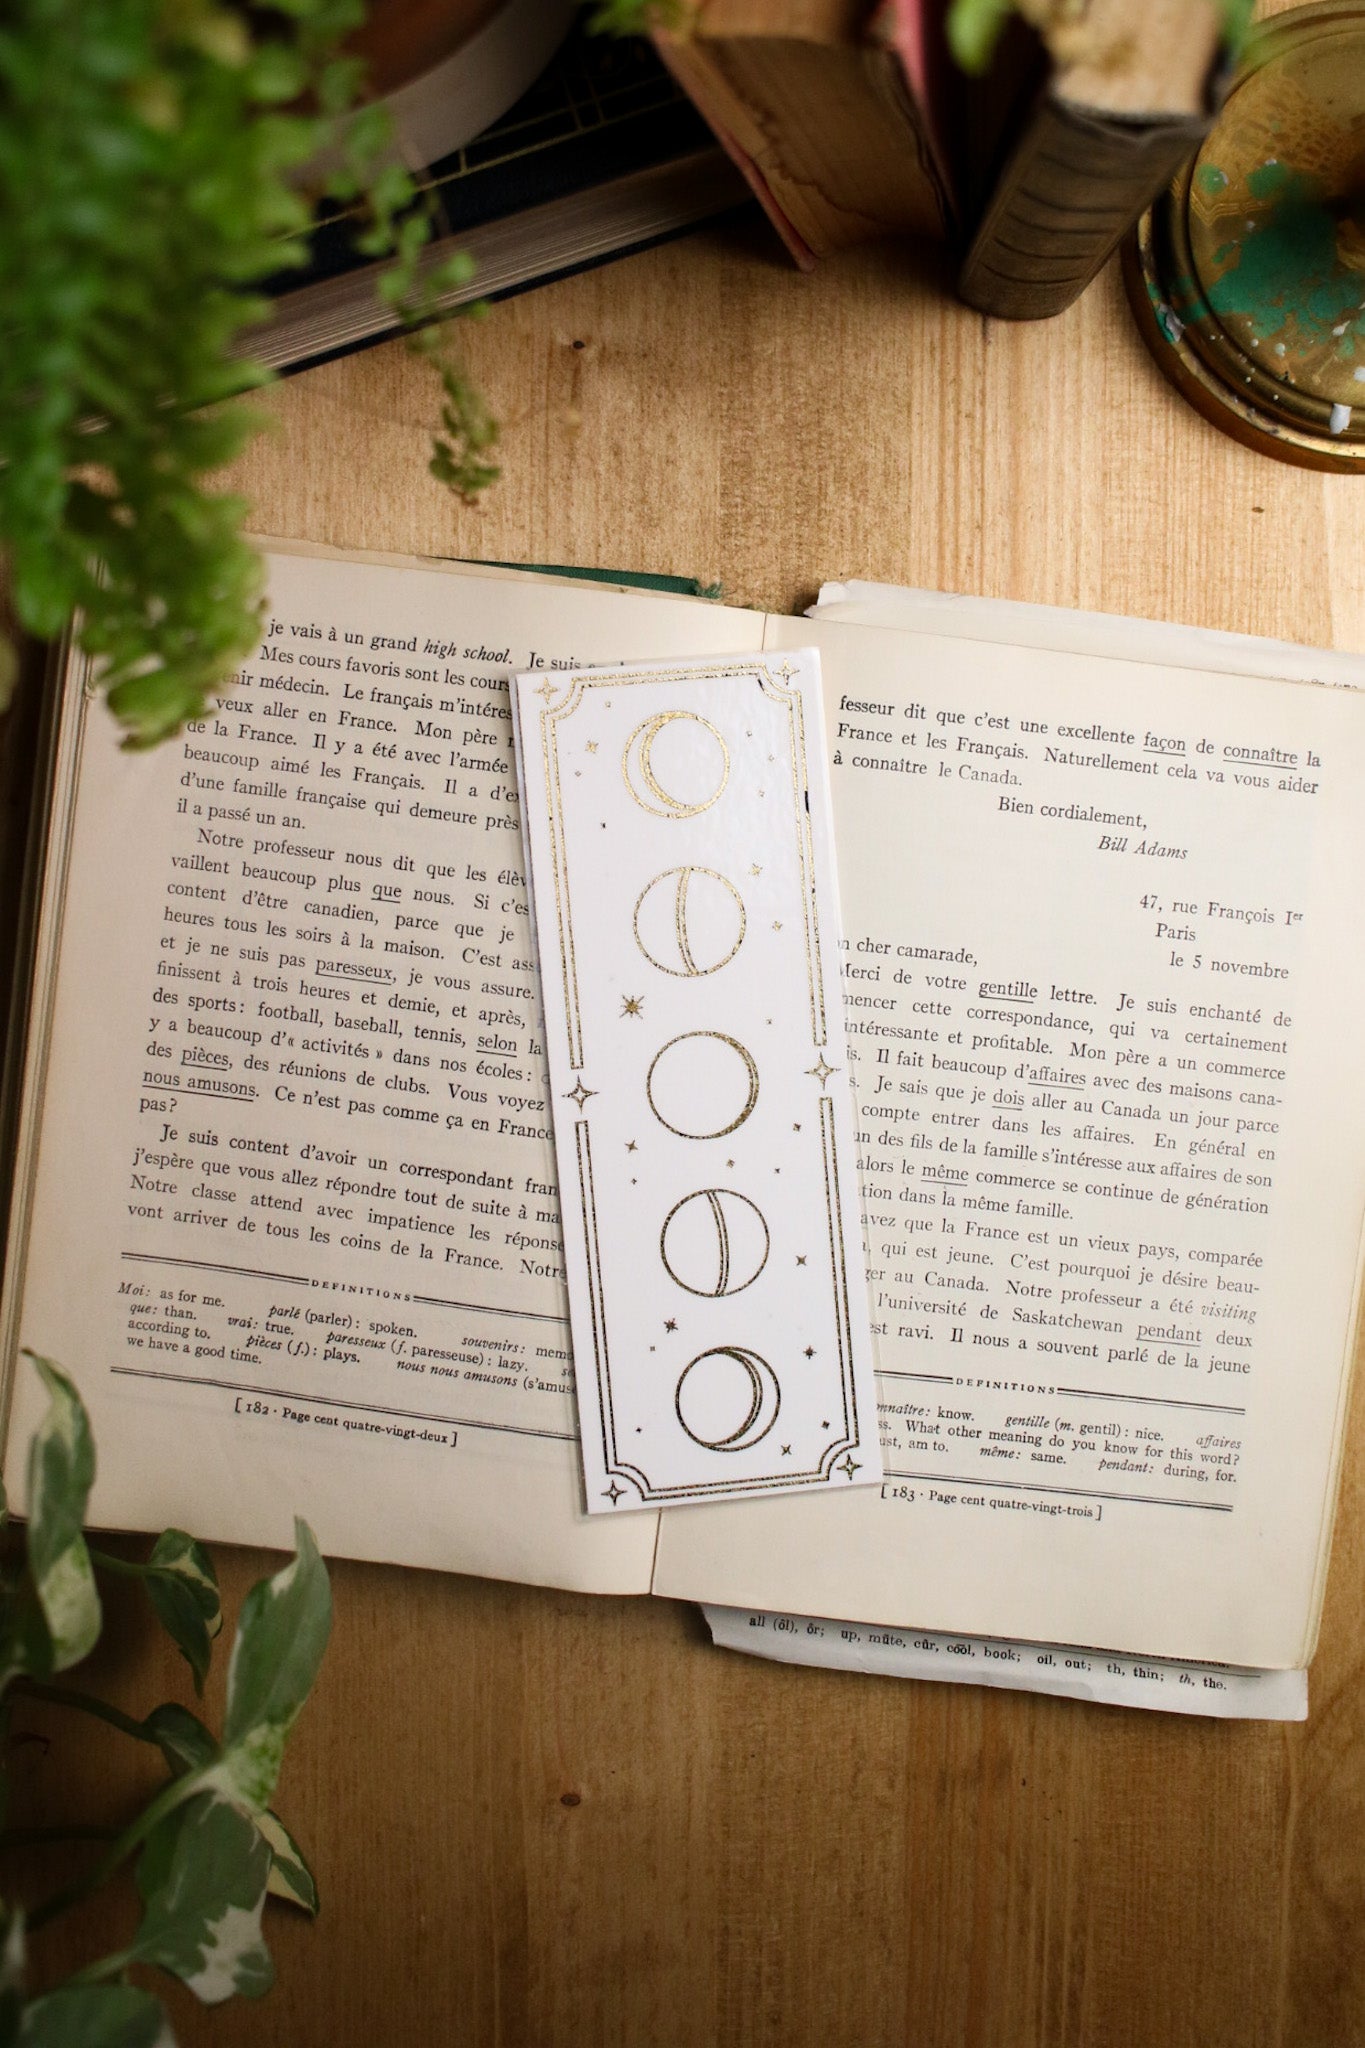 SECONDS - White Moon Phase Bookmark